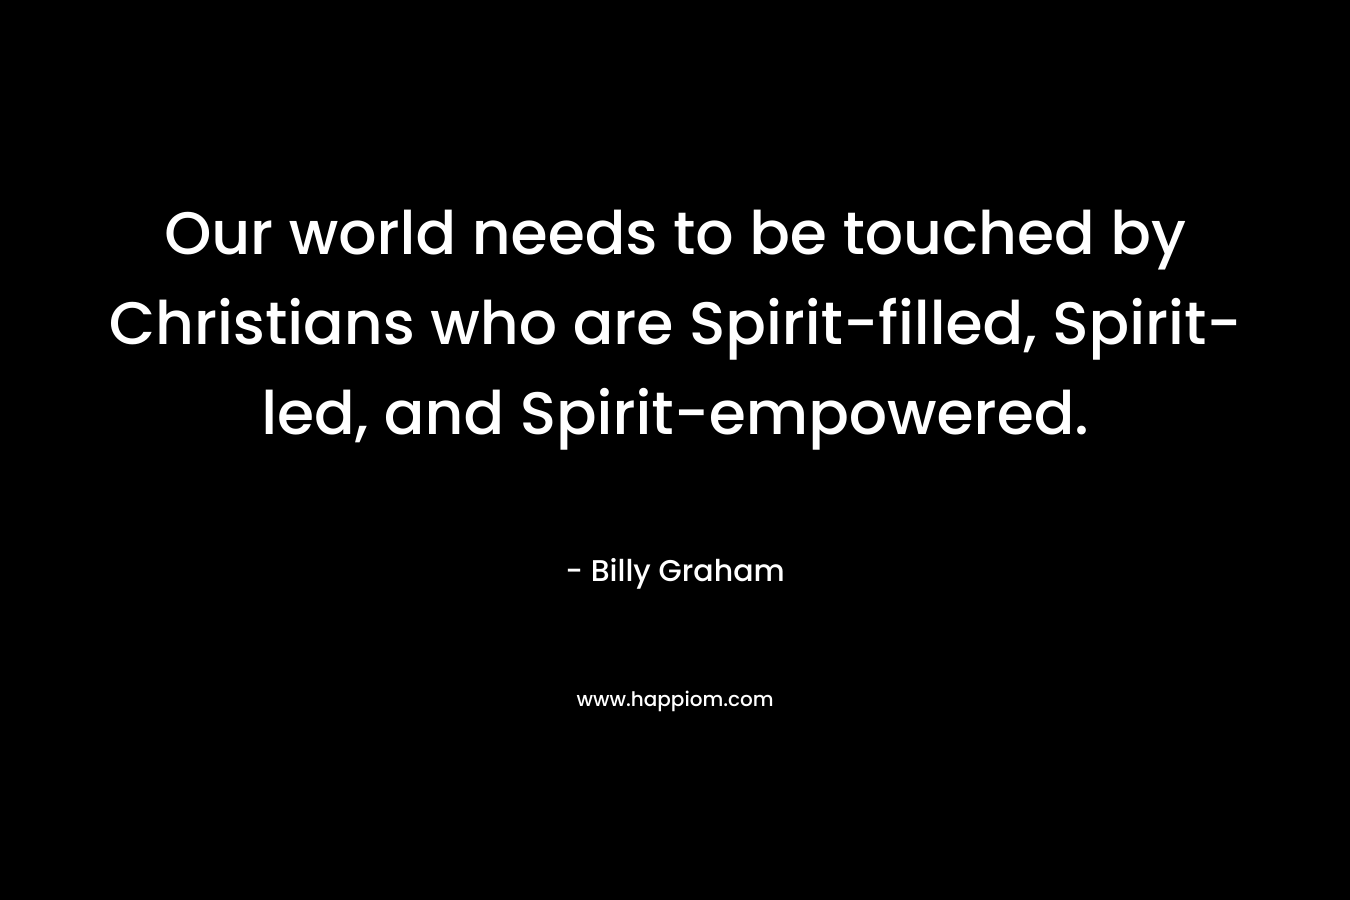 Our world needs to be touched by Christians who are Spirit-filled, Spirit-led, and Spirit-empowered.